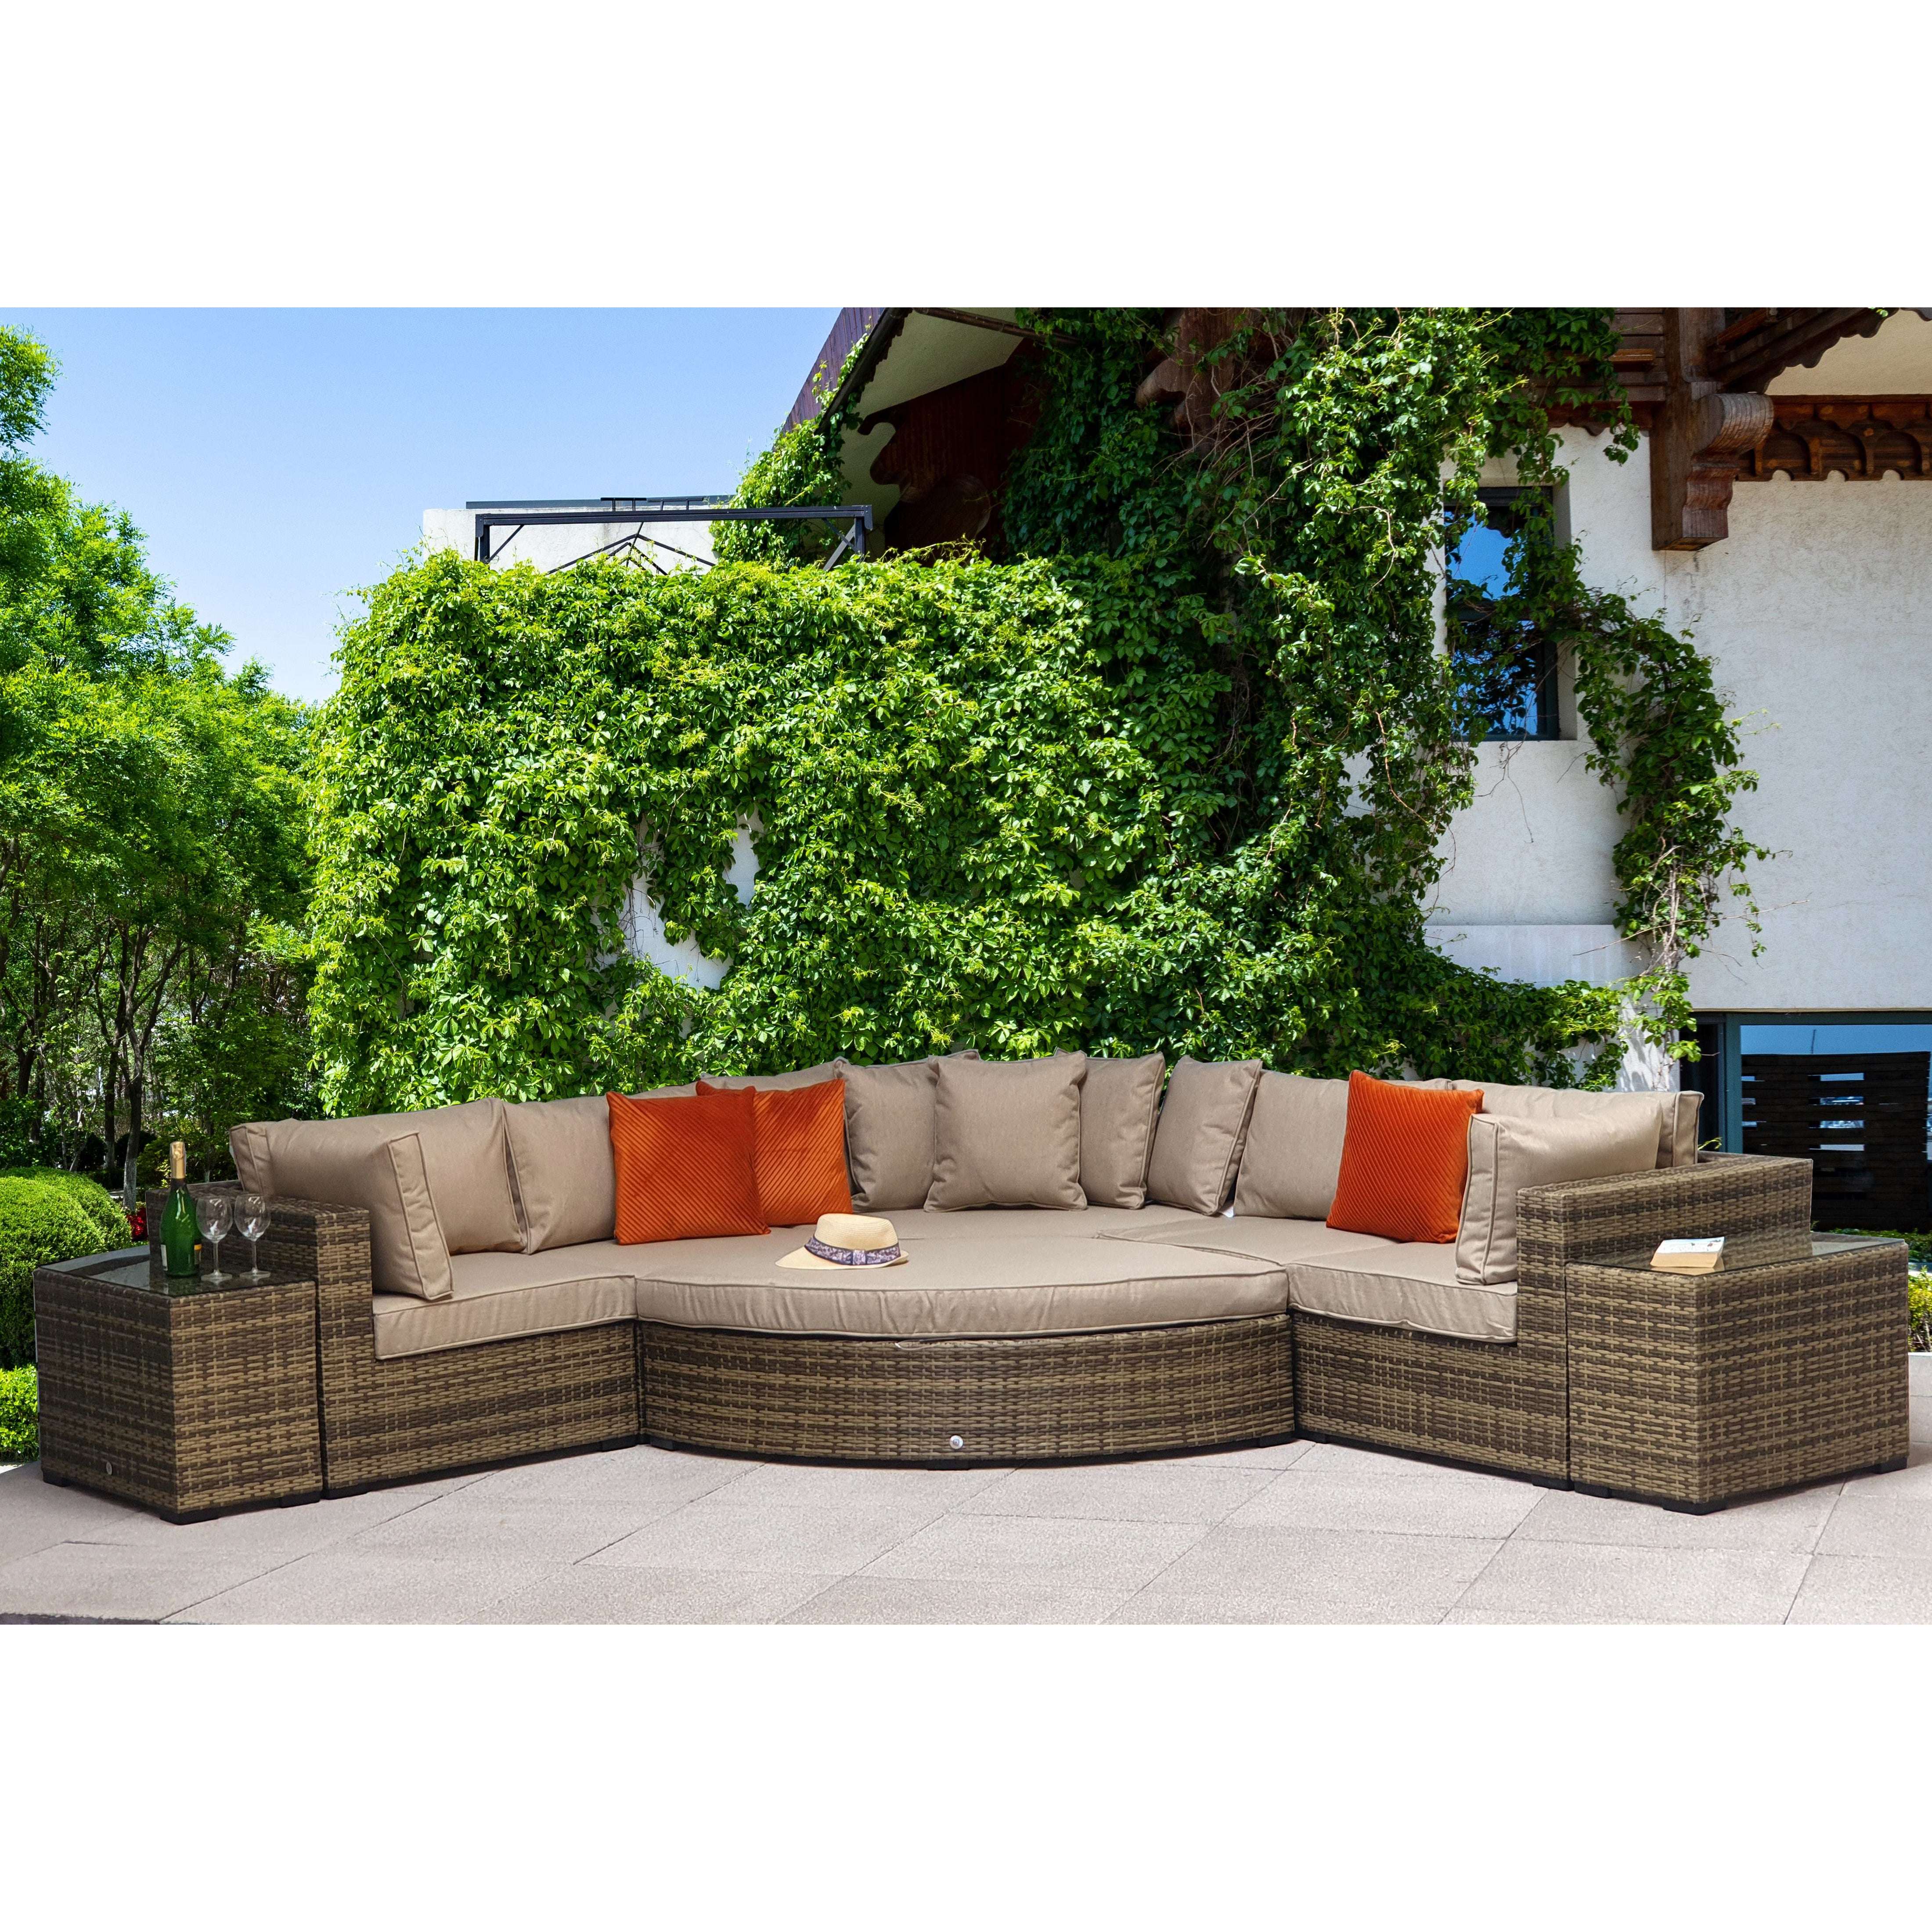 Exceptional Garden:Signature Weave Jessica Large Corner Sofa - Mixed Brown